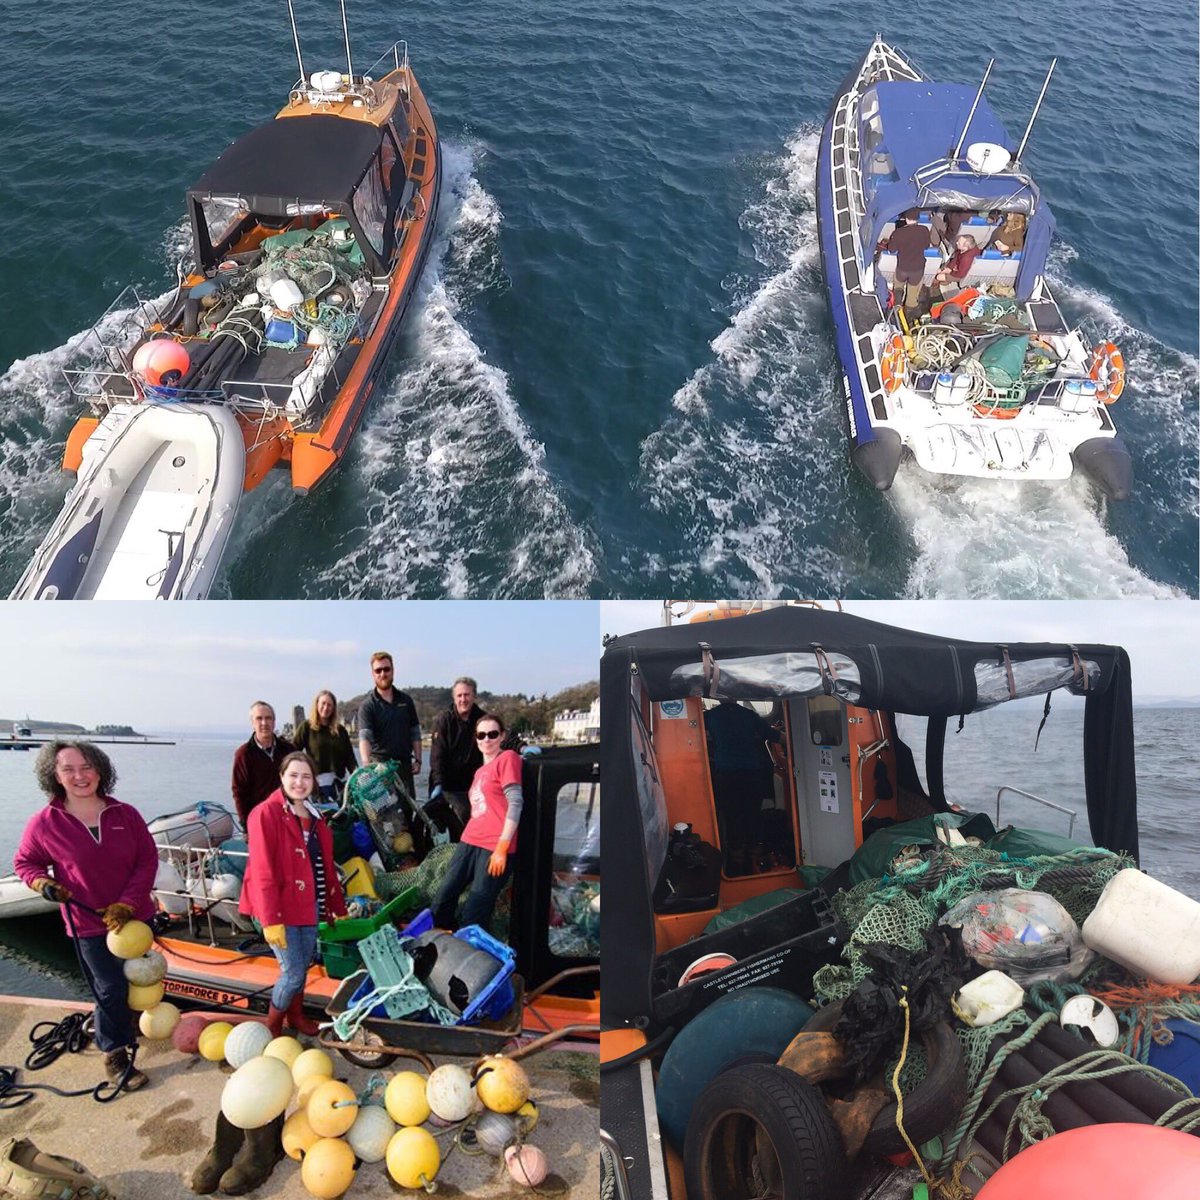 Remember the success of our remote boat based #beachclean last year!? We’re doing three days of this next week with an added squad of kayakers to tackle those hard to reach areas! We need some volunteers to help! Email us if keen. #marineplastic #BluePlanetUK #plasticpollution